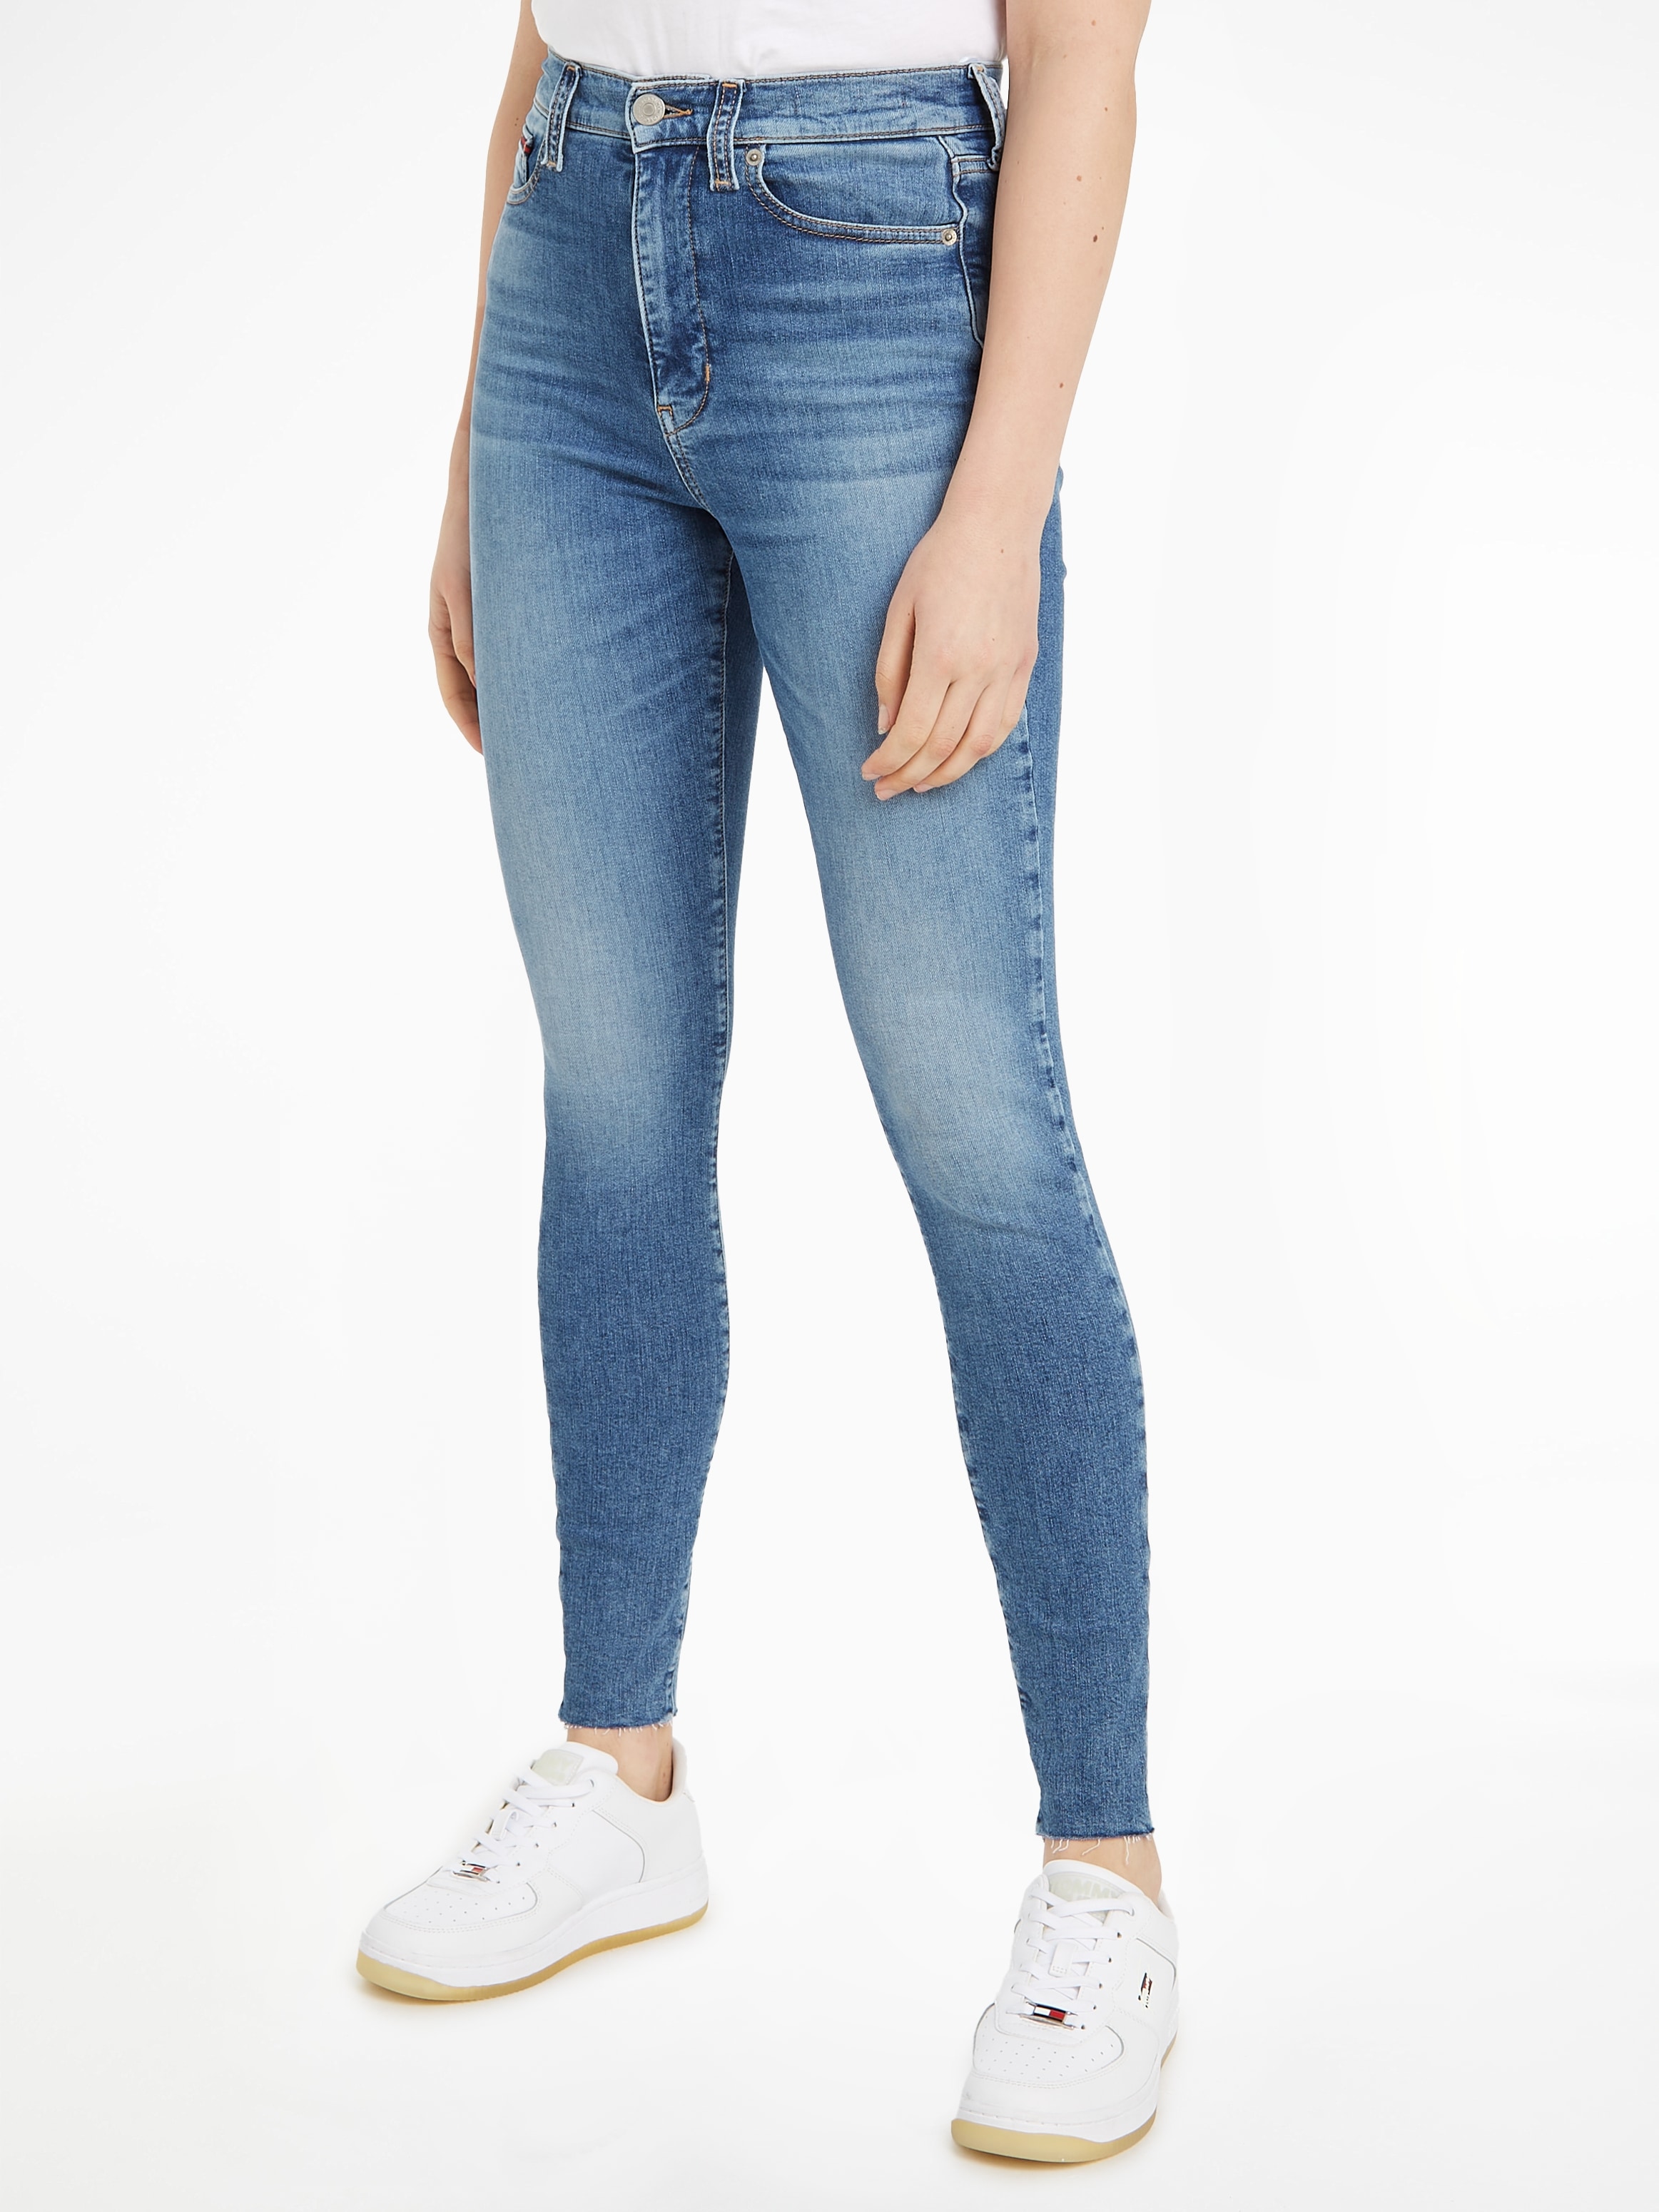 Tommy Jeans Skinny-fit-Jeans HR SSKN Labelflags CG4«, mit »Jeans walking SYLVIA I\'m Logobadge shoppen und 